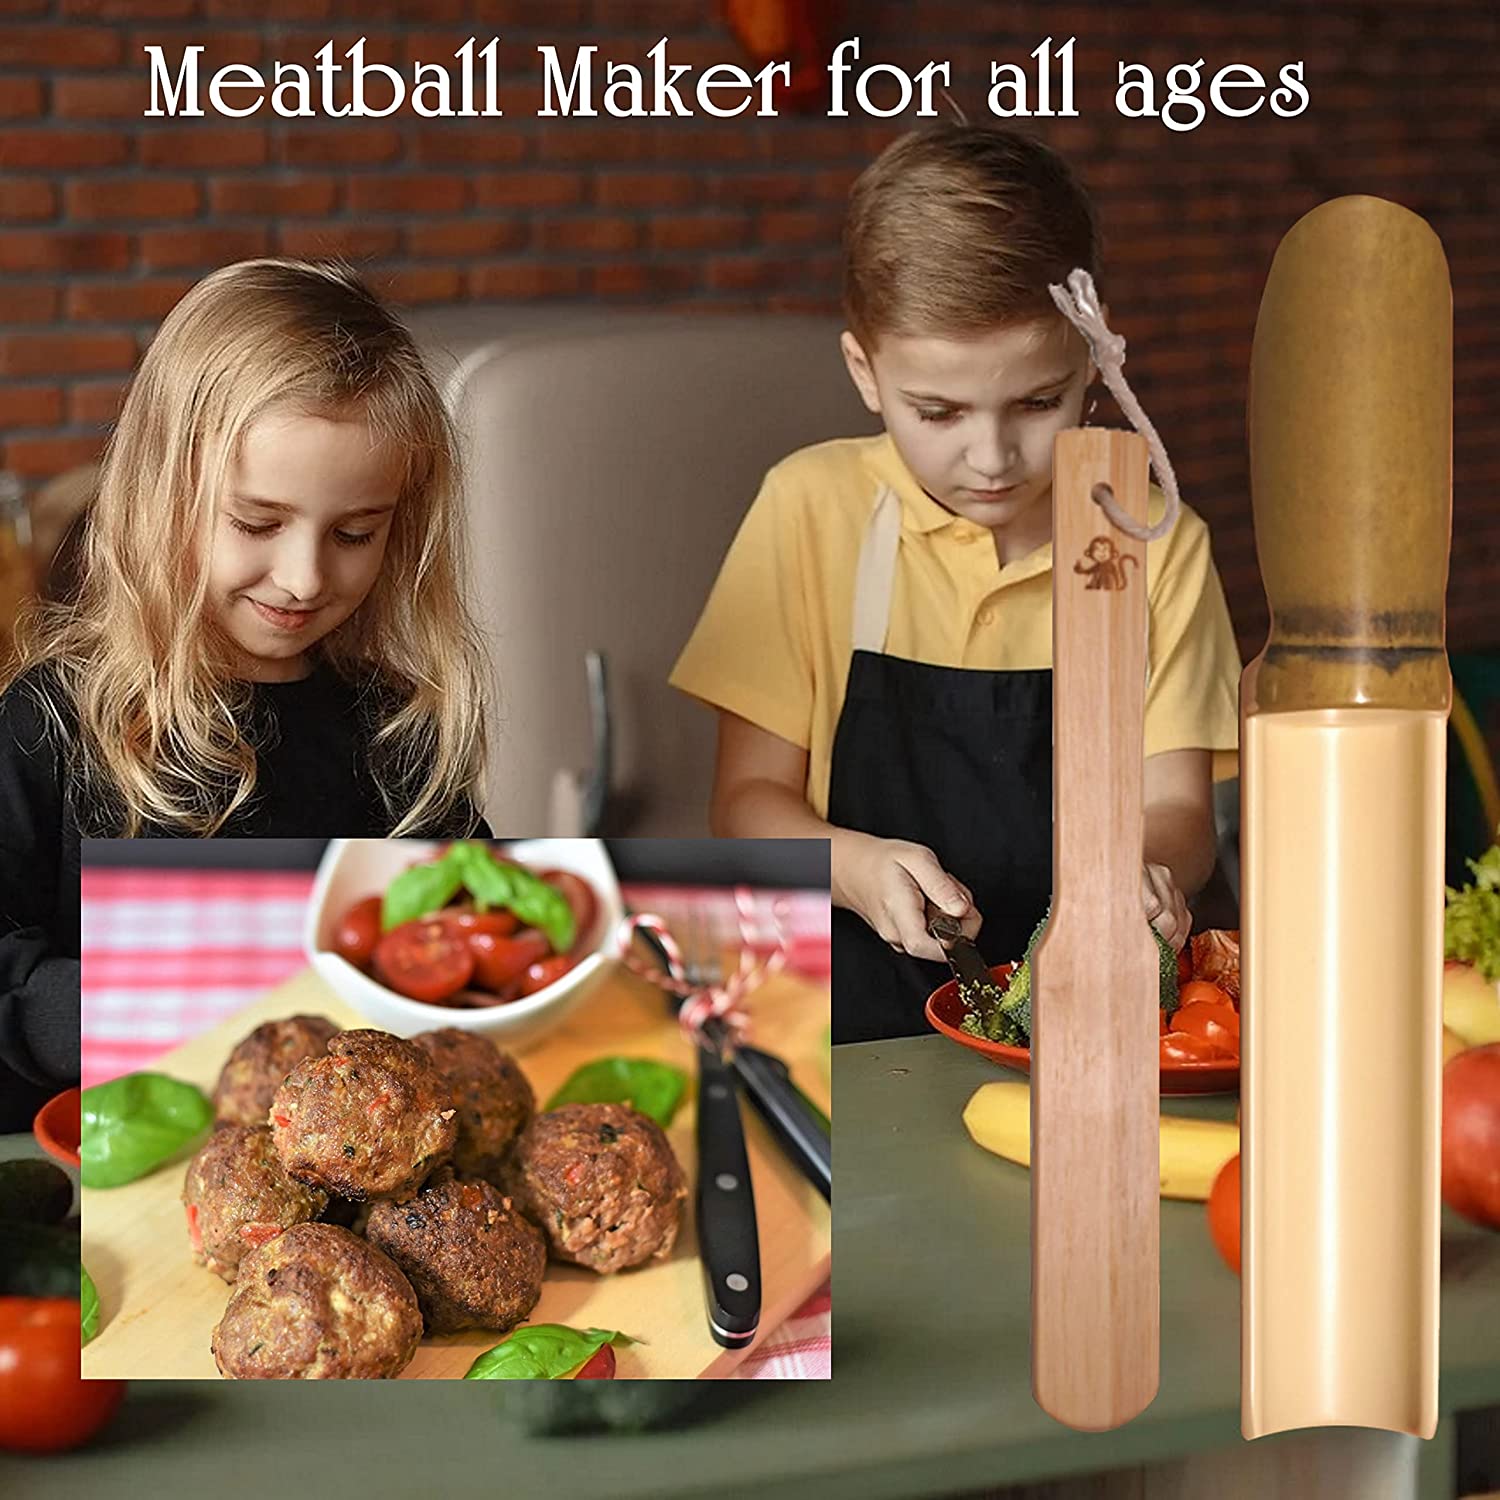 Albino monkey Meatball Maker with Convenient Meatballer Scoop - Meat Baller Mold for Swedish meatballs Easy to Make Perfect Meat/Fish Balls for Hot Pot Cooking - Must Have Kitchen Gadget